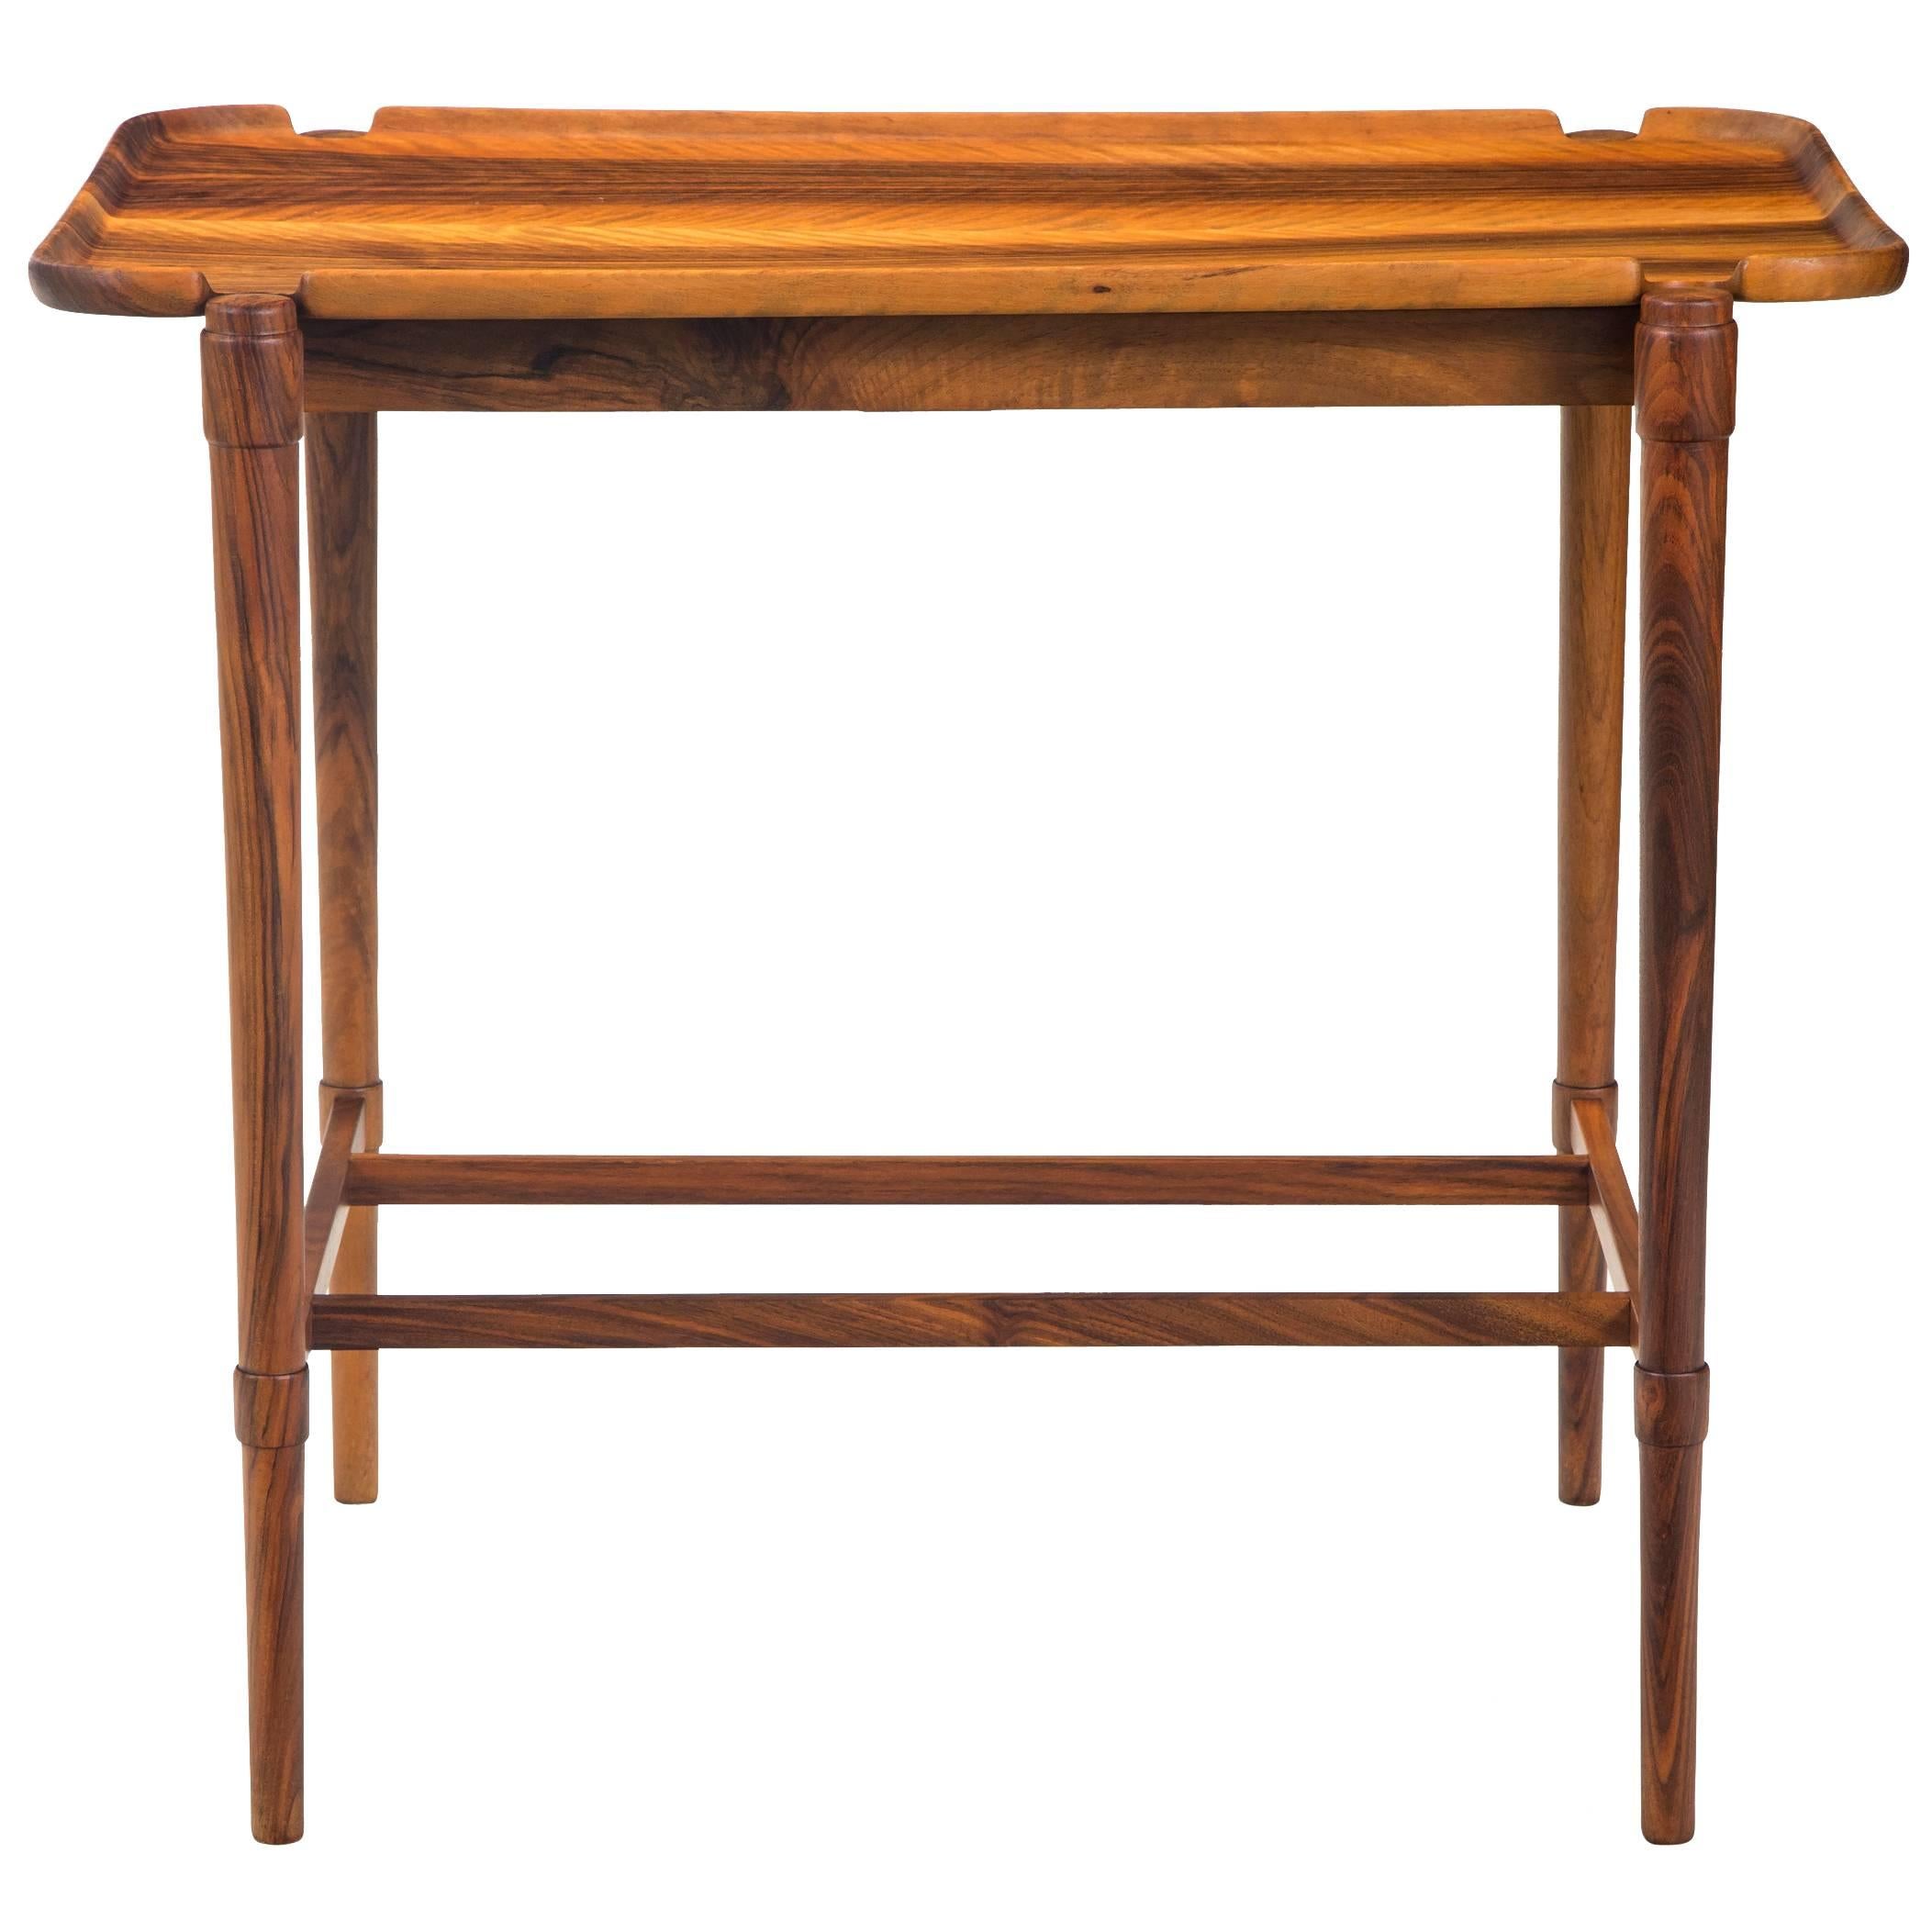 A Rare Early Solid Walnut Tray-top Table, With Production Stamp Number 1